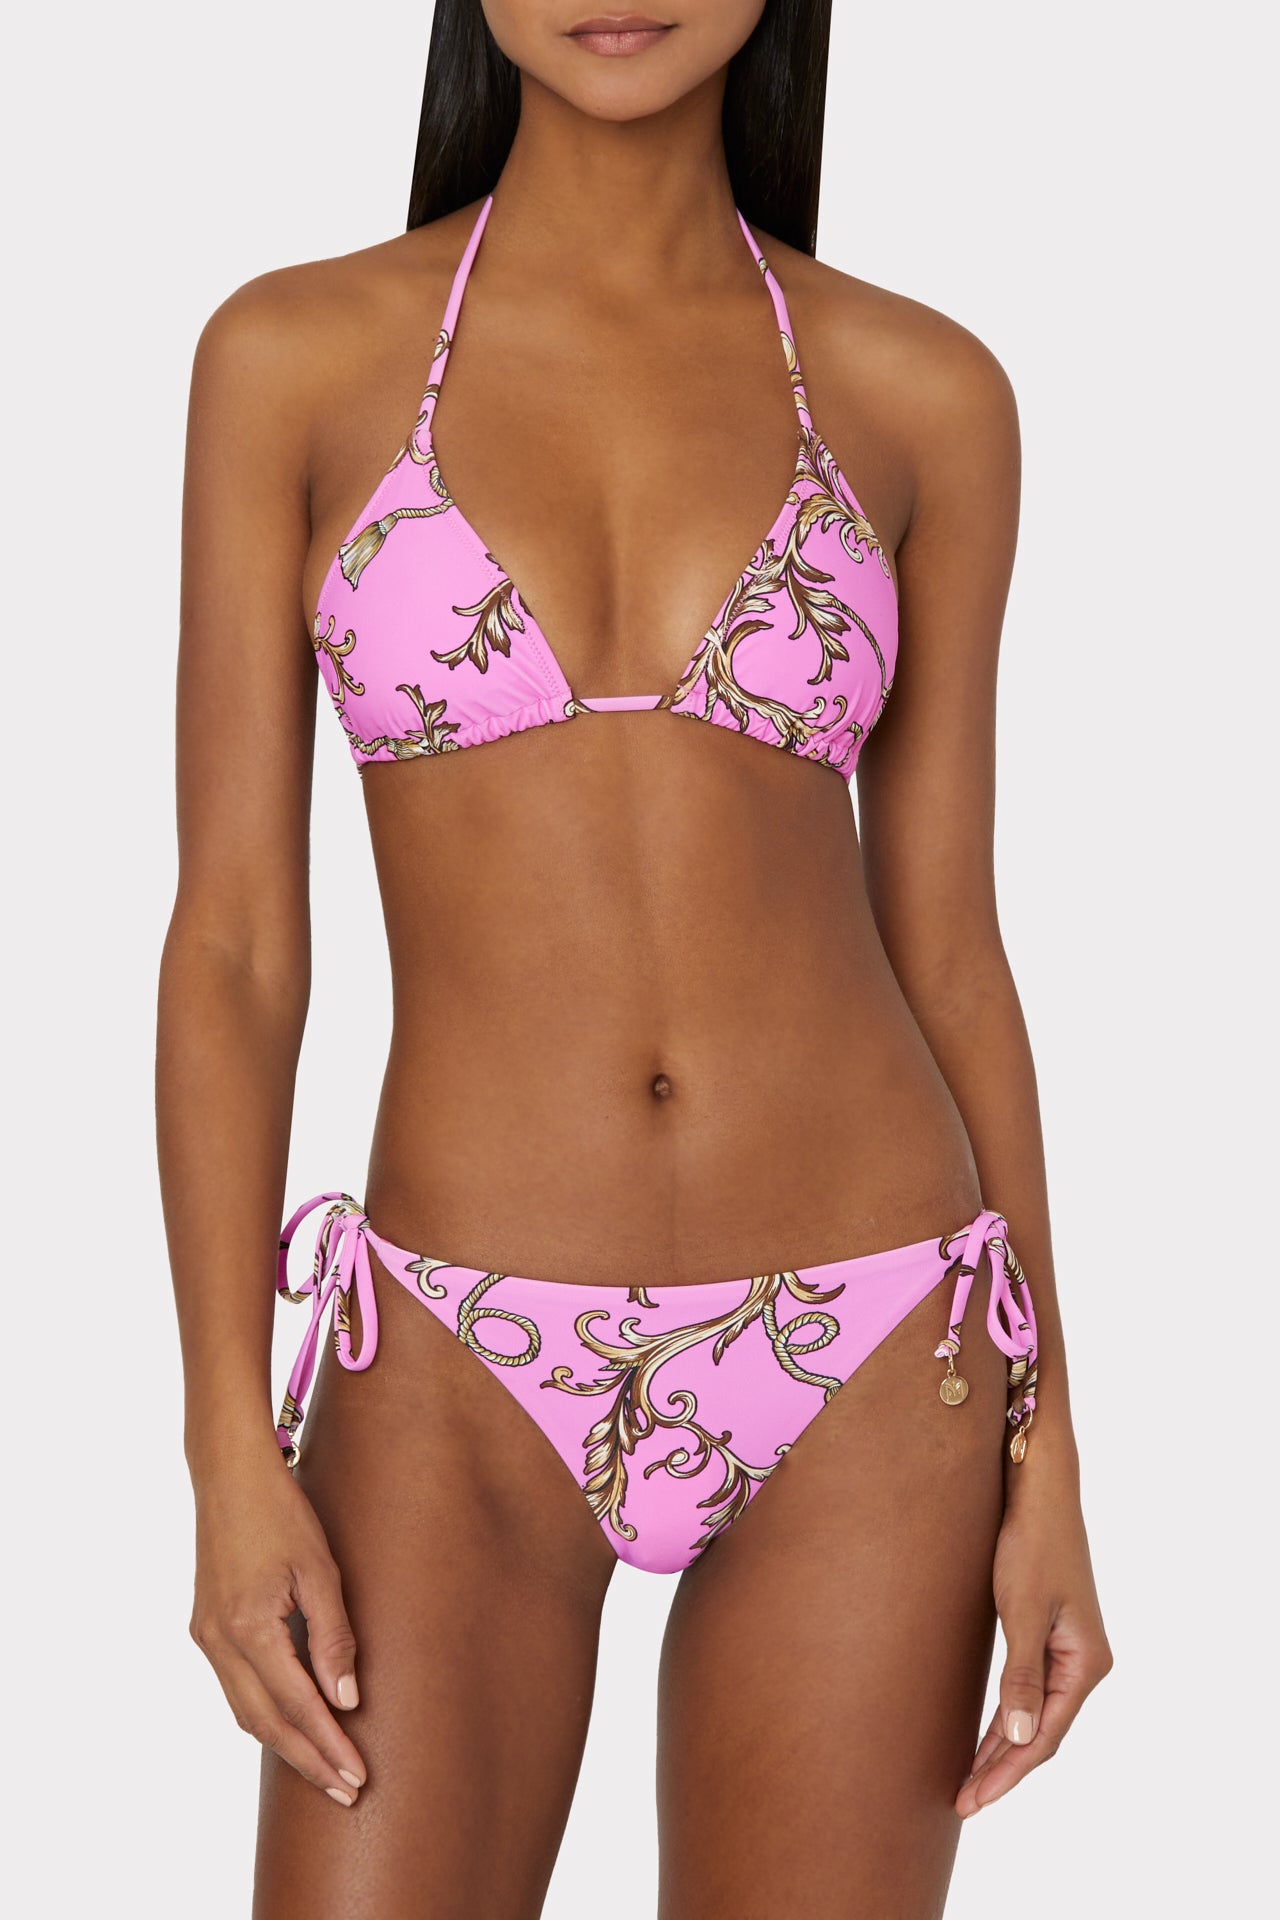 Milly Chain Print Bikini Top In Pink Multi - MILLY in Pink Multi | MILLY